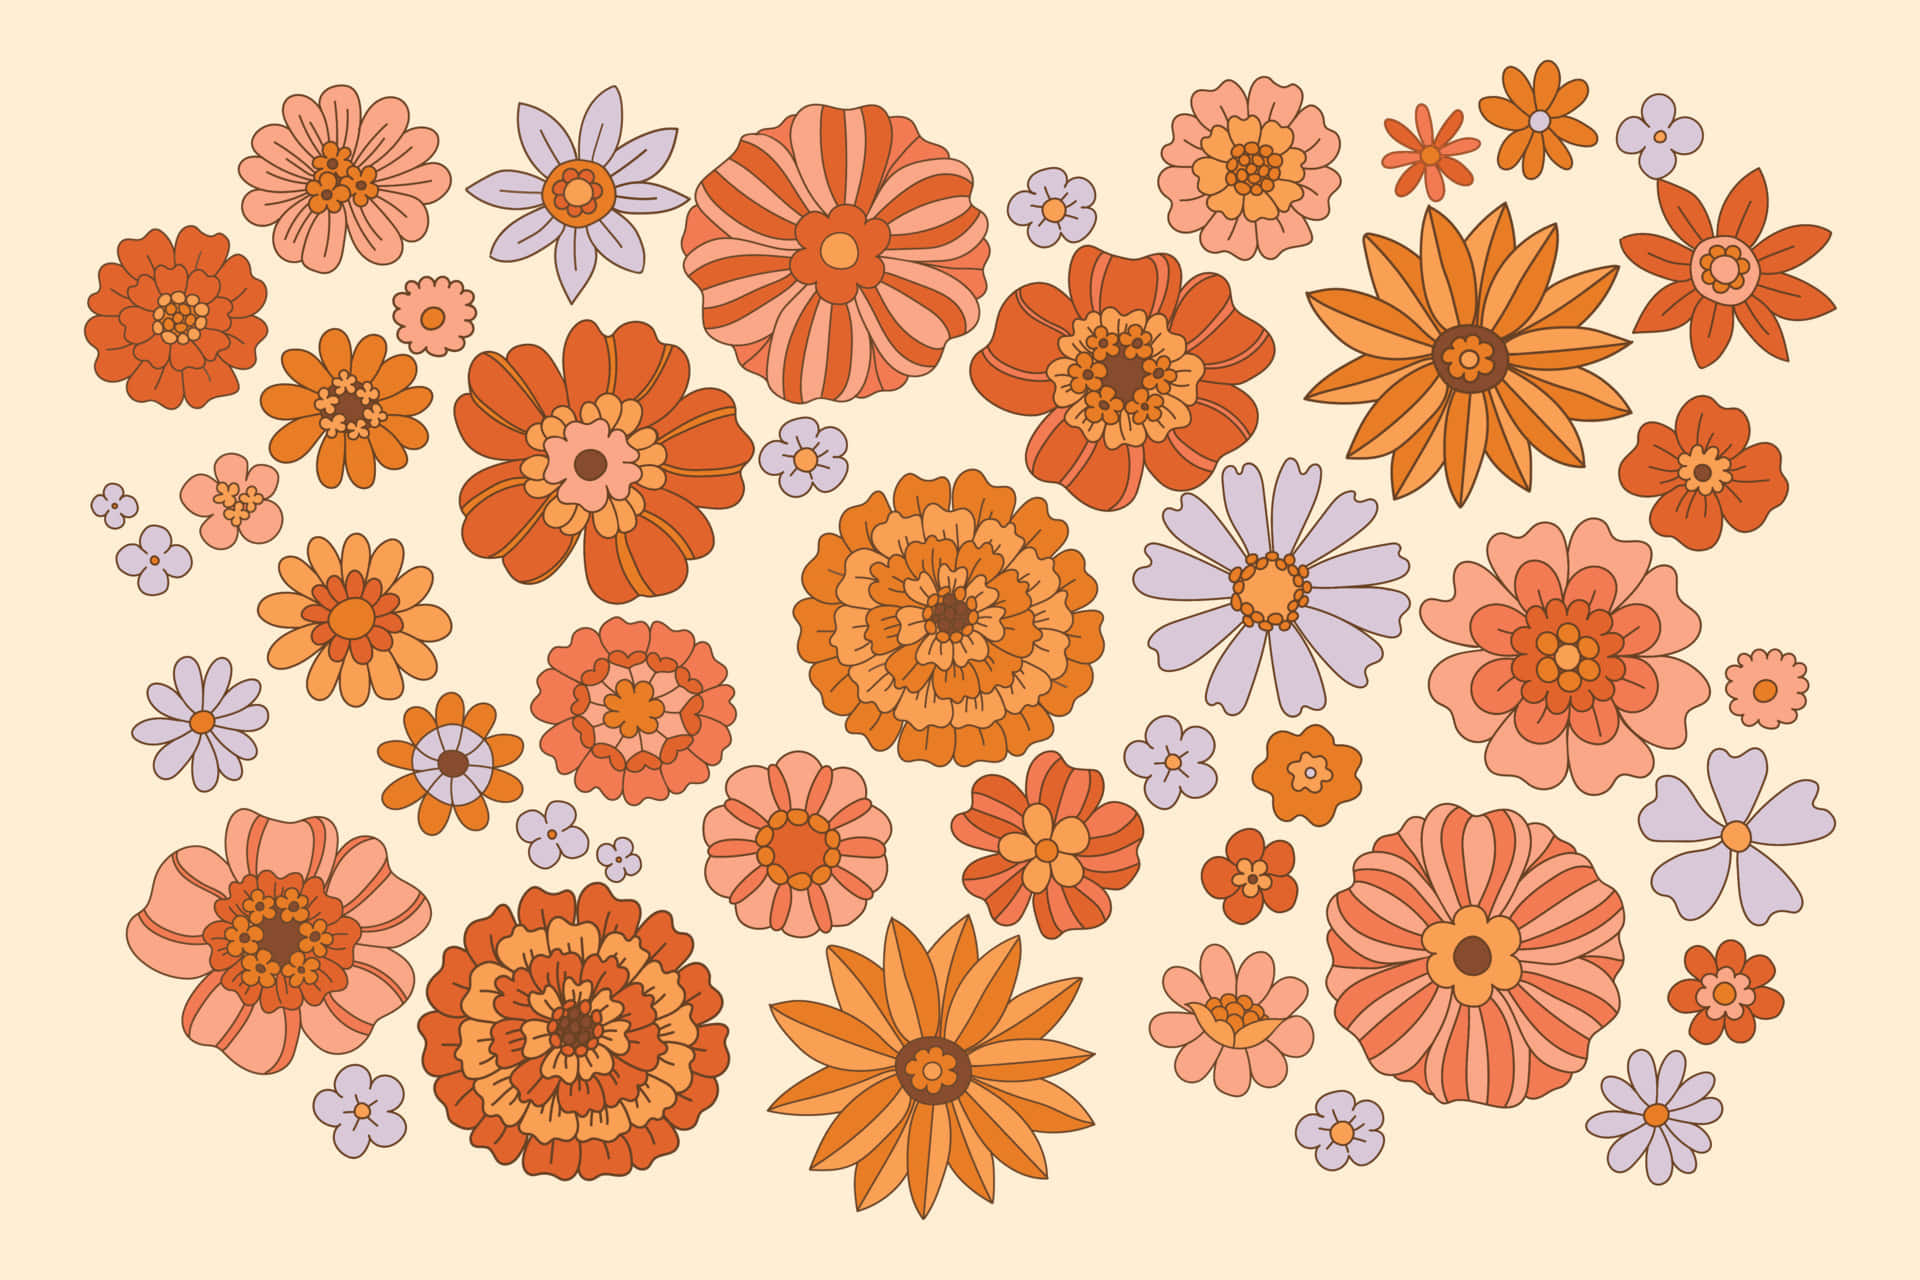 Blooming Sunflowers Aesthetic 70s Background For Desktop